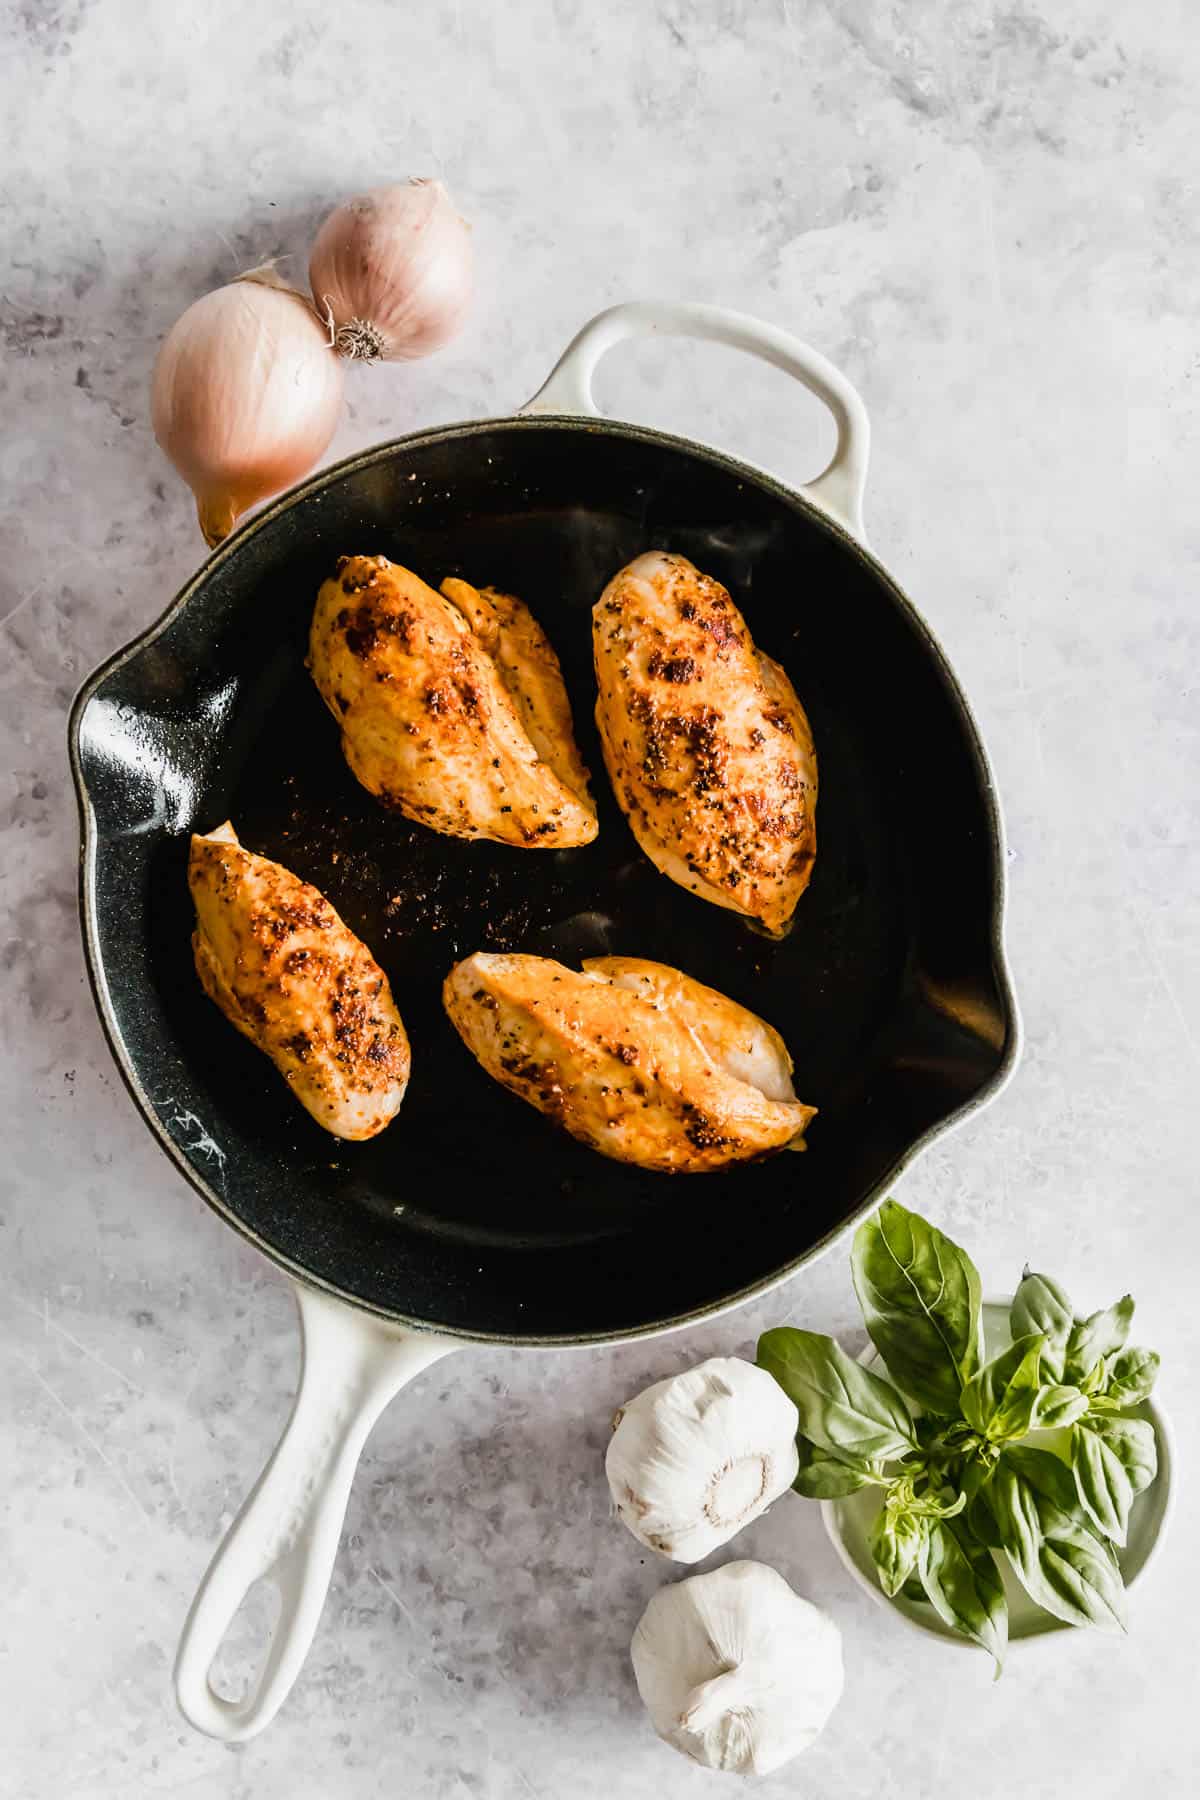 Four seasoned chicken breasts in a cast iron skillet, surrounded by garlic, basil, and onions on a marble surface.